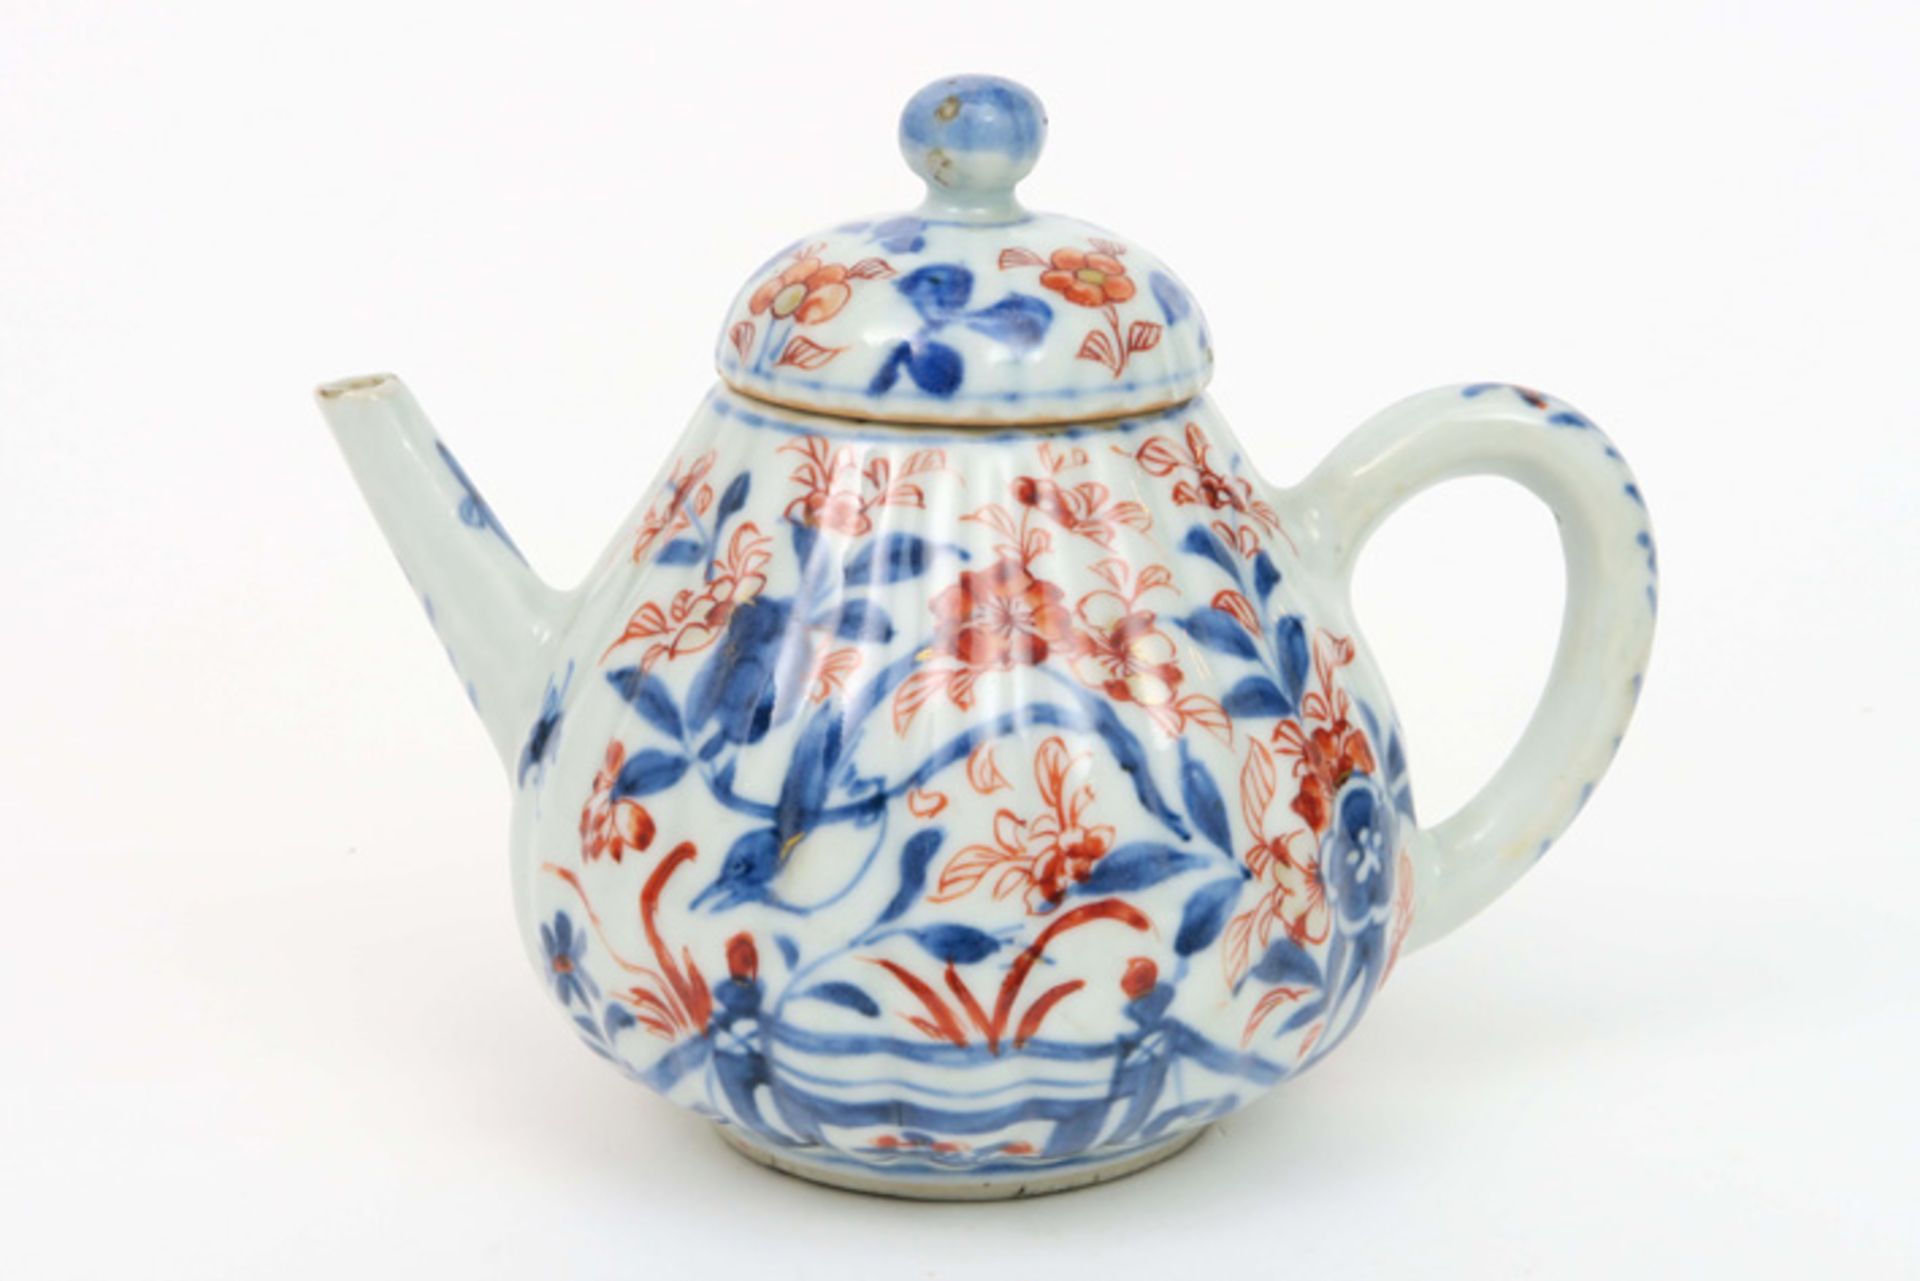 18th Cent. Chinese lidded tea pot in porcelain with an Imari flowers decor||Achttiende eeuwse